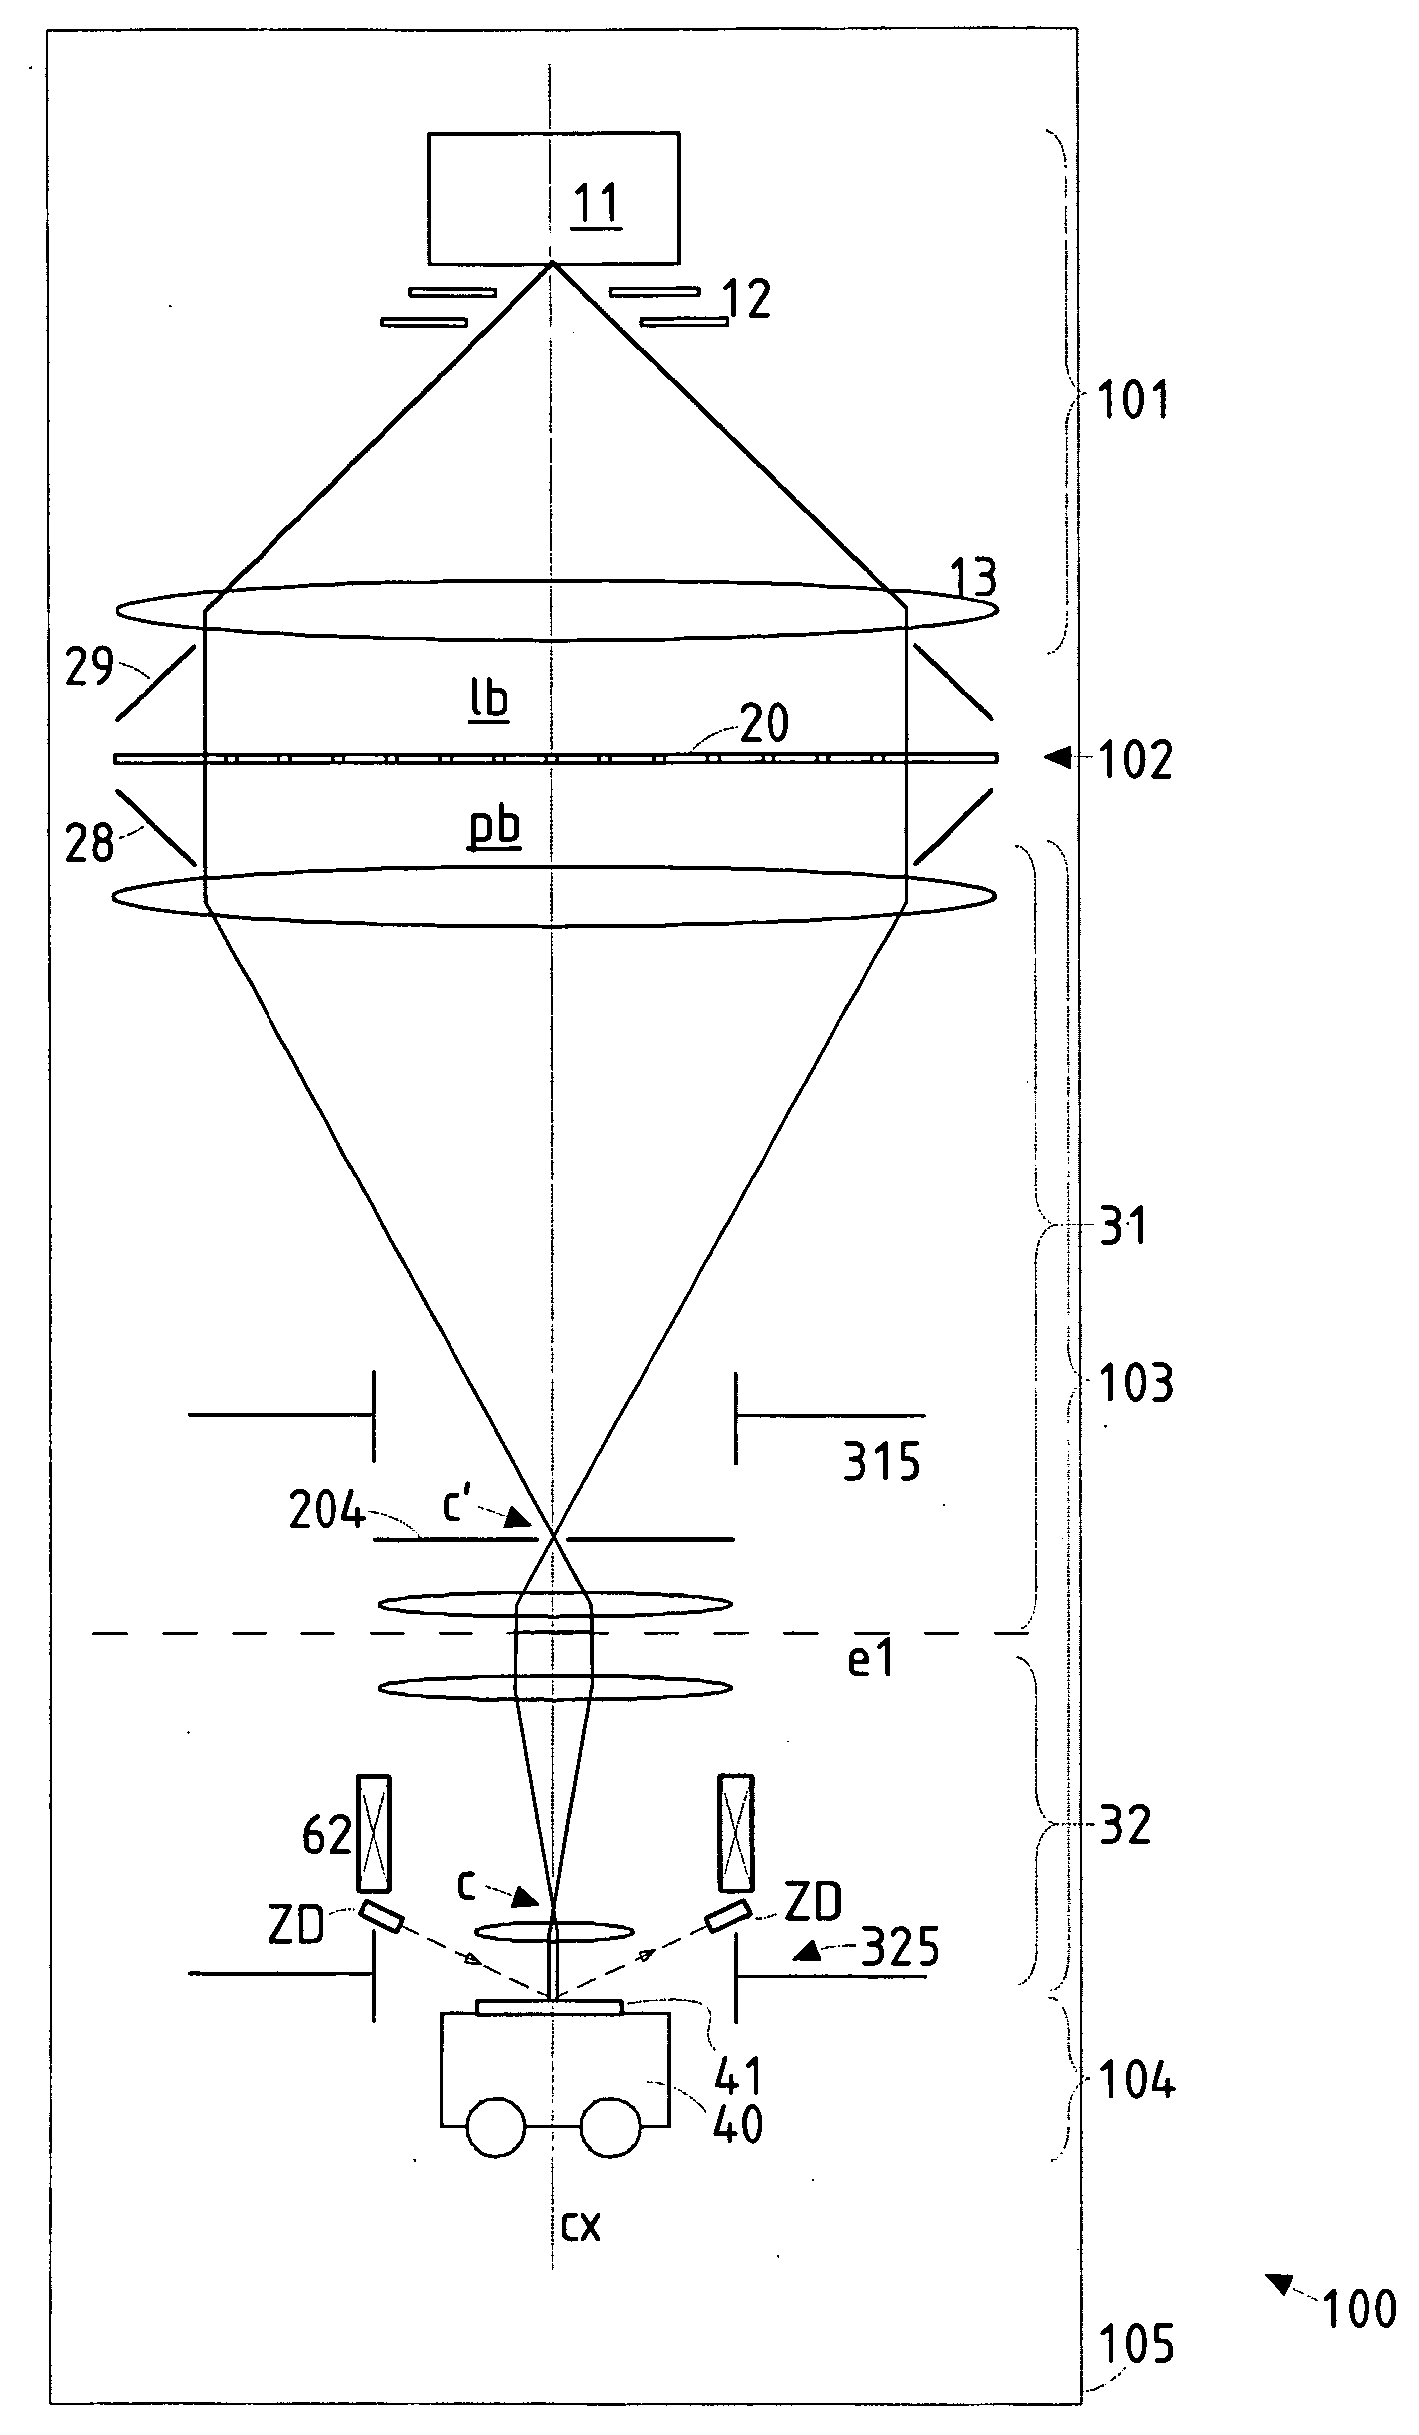 Particle-optical projection system